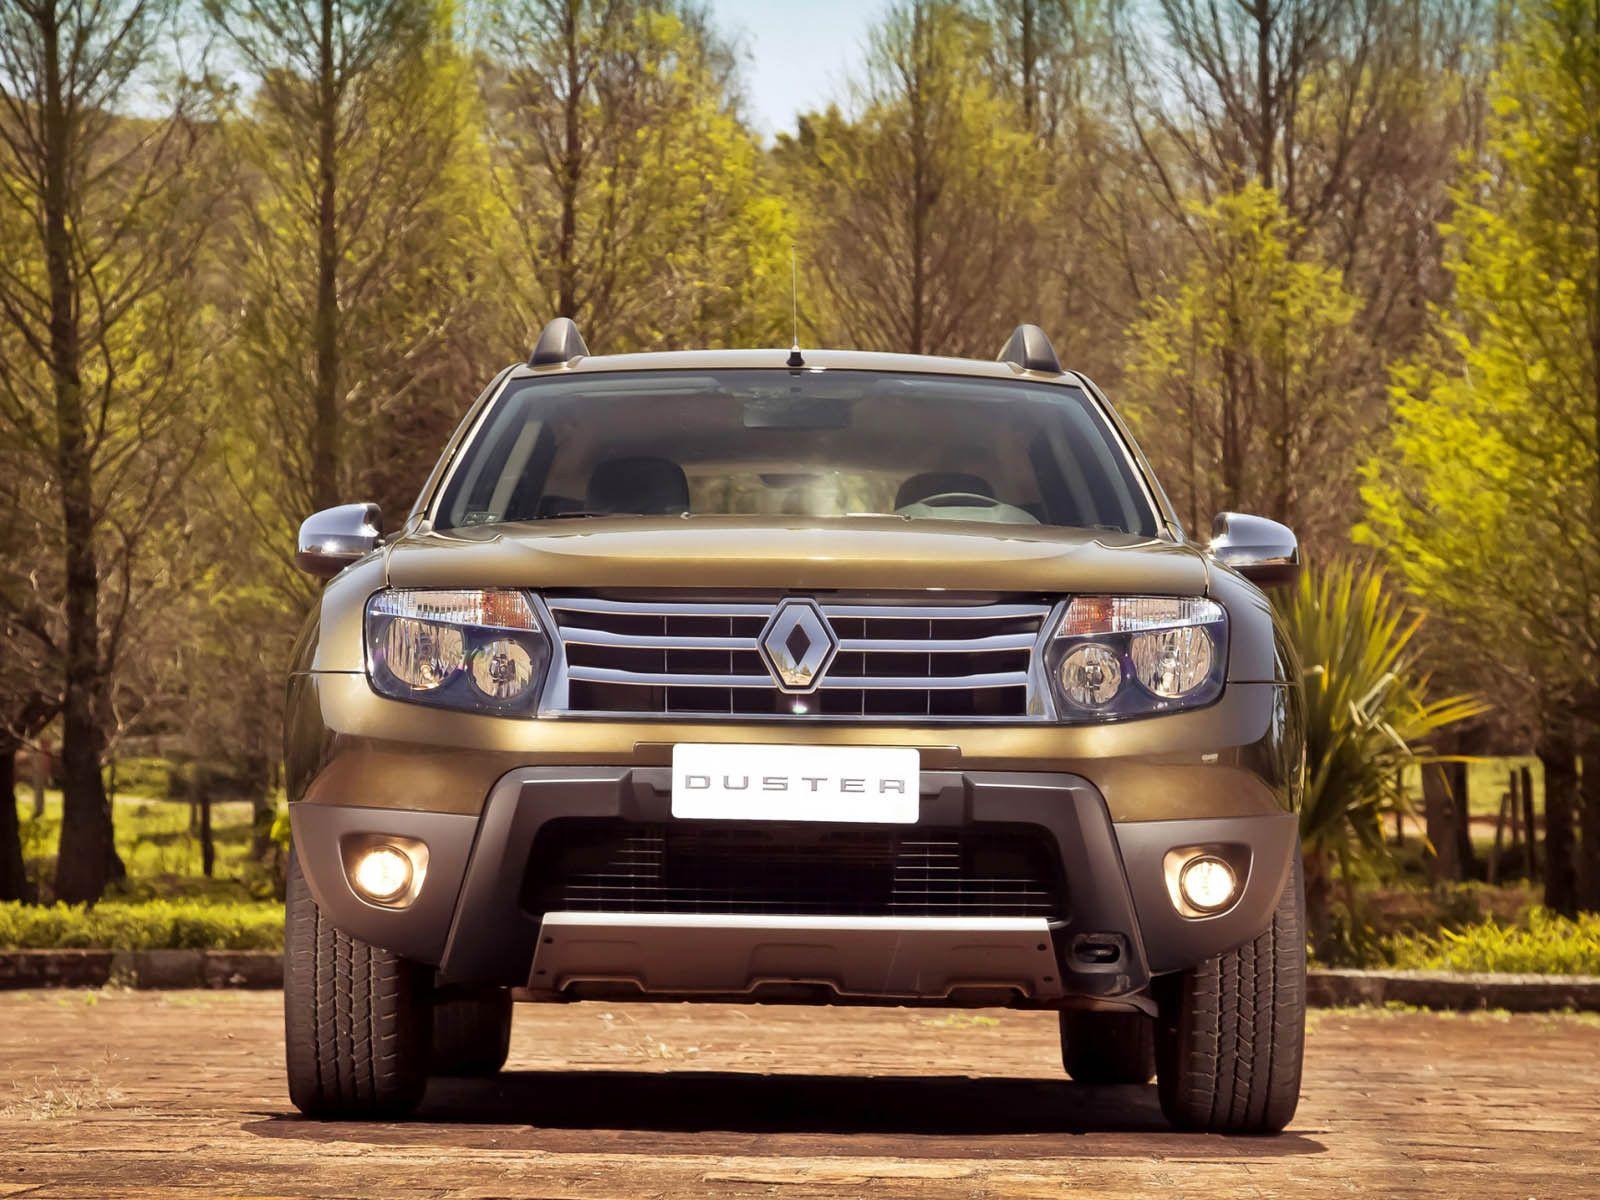 Design of the car Renault Duster wallpaper and image